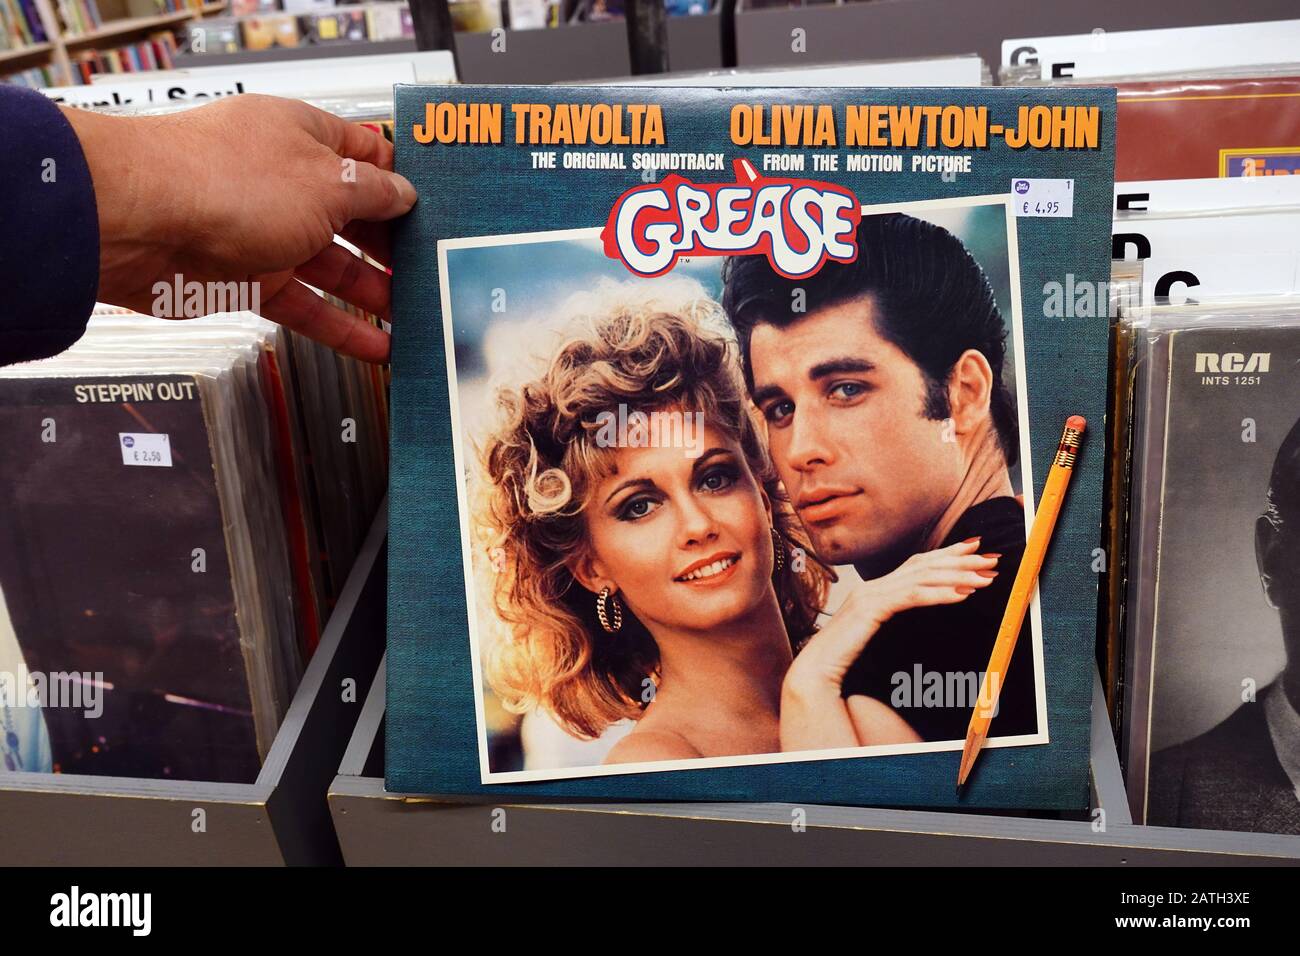 grease original soundtrack from the motion picture